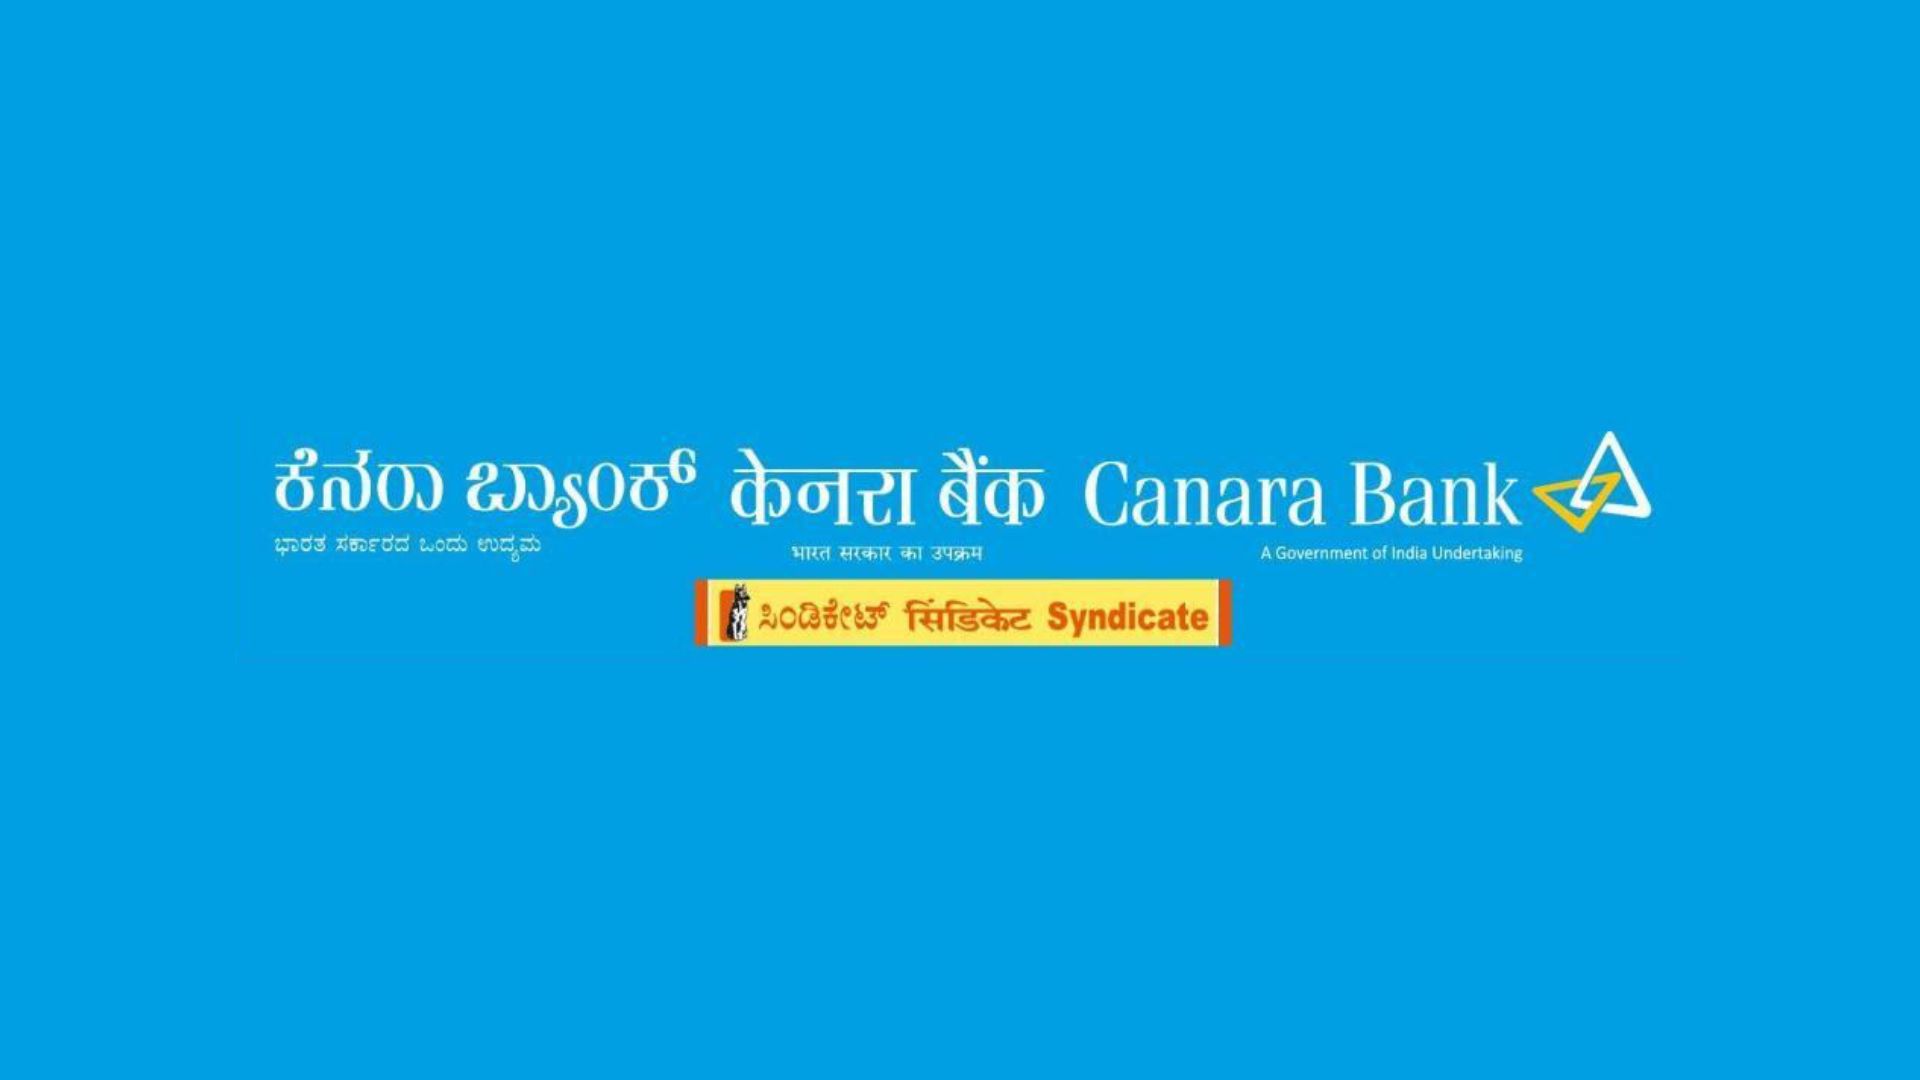 CANARA BANK ENTERED IN AN MoU WITH M/s TOYOTA KIRLOSKAR MOTOR PRIVATE LIMITED TO OFFER ATTRACTIVE FINANCE SCHEMES